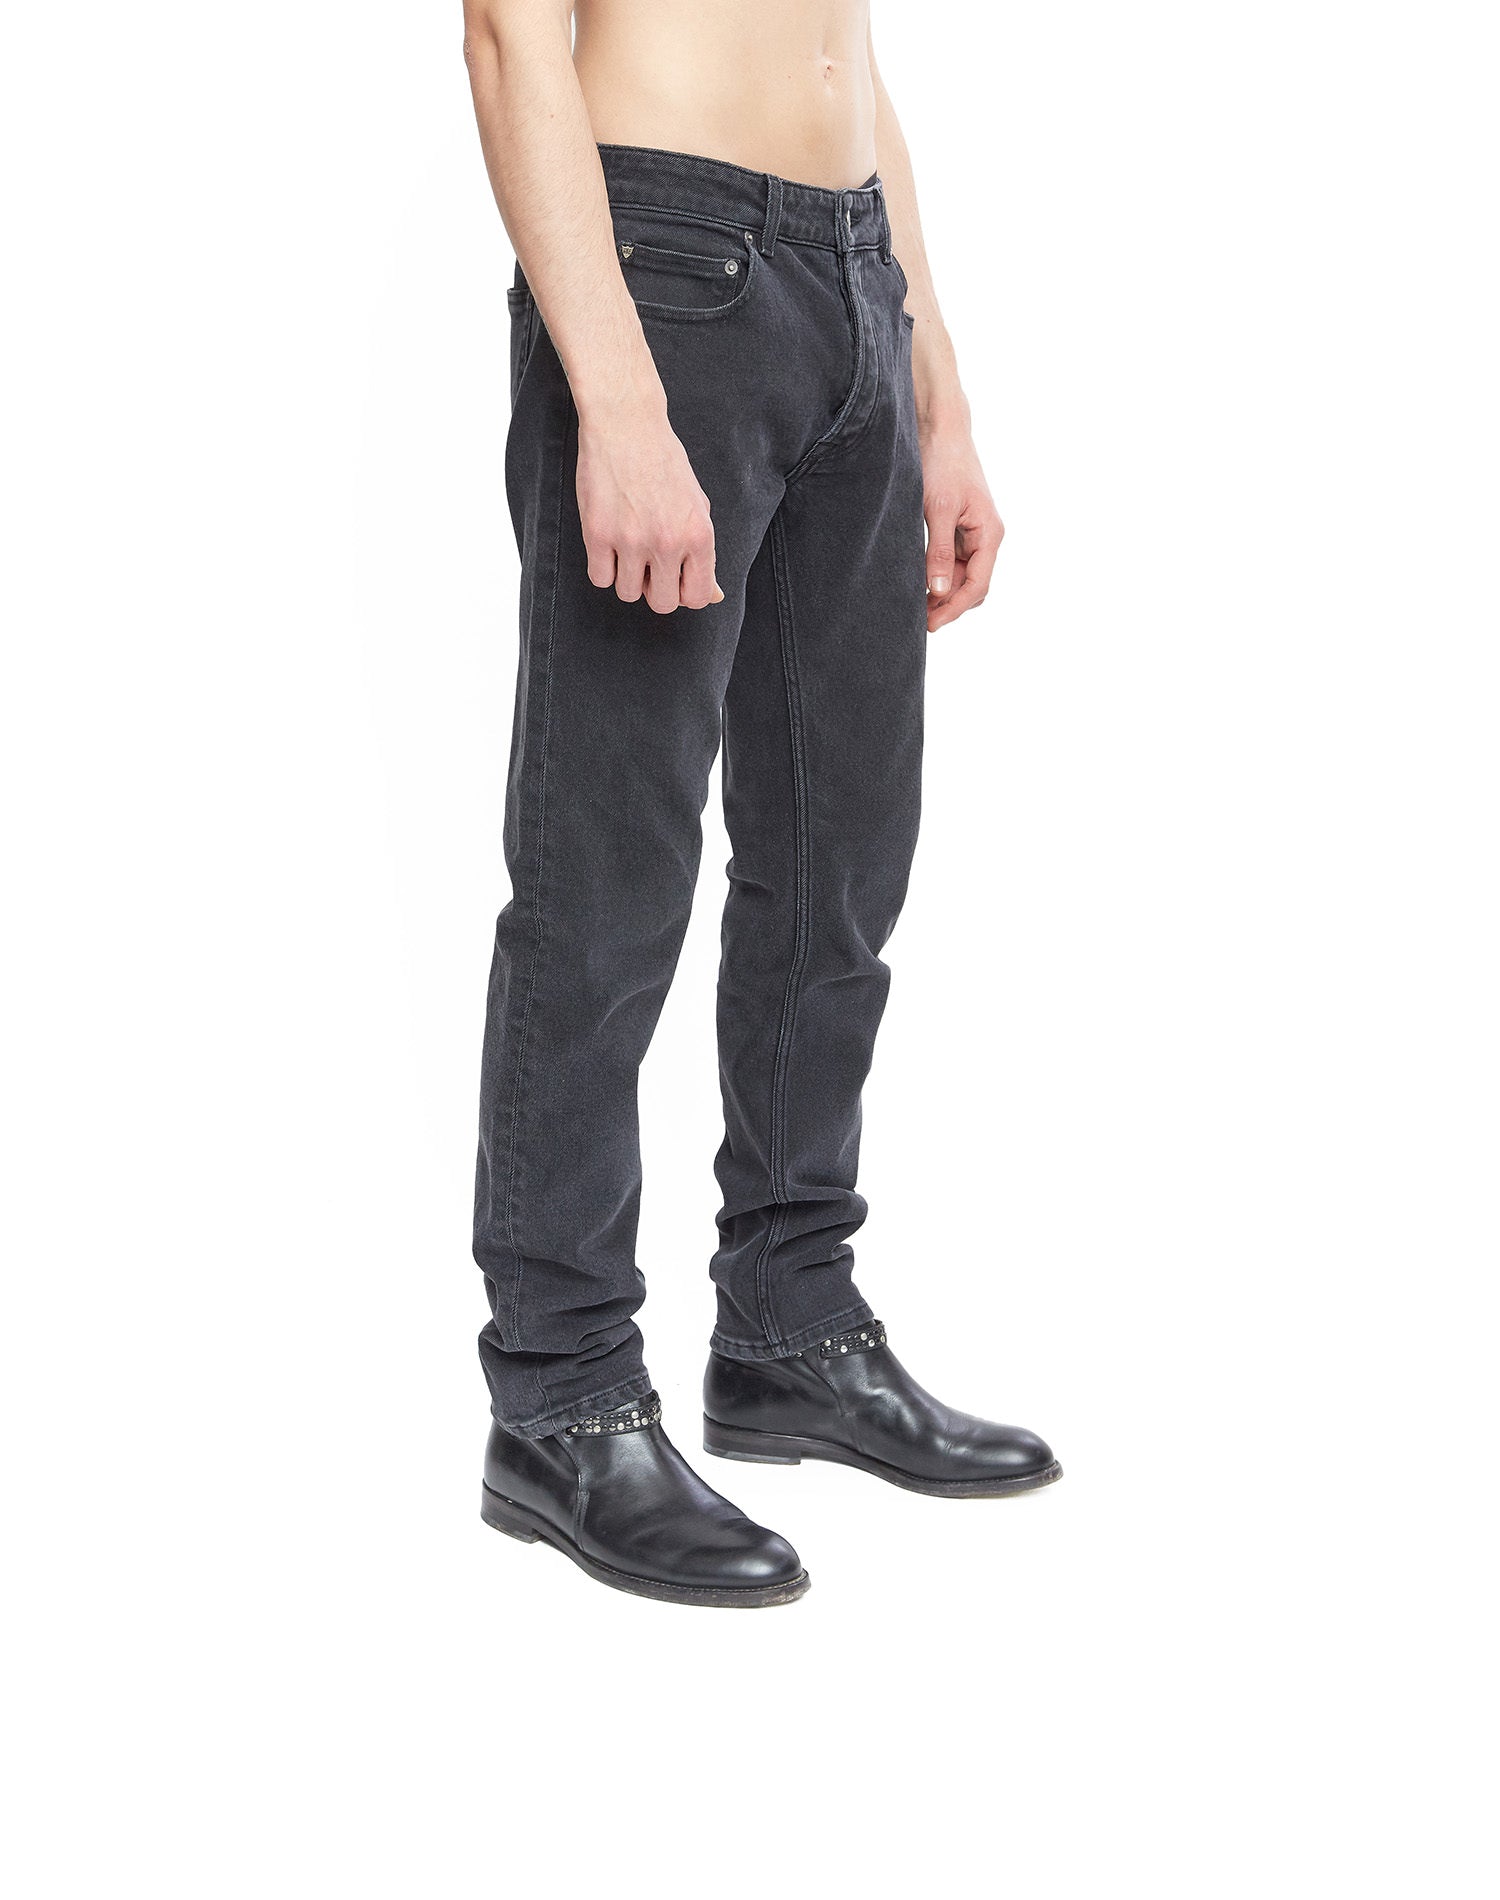 SLIM BASIC BLACK Slim fit jeans in black denim, 5 pockets, hidden front button closure. Metallic logo detail on the back. 100% cotton. Made in Italy. HTC LOS ANGELES